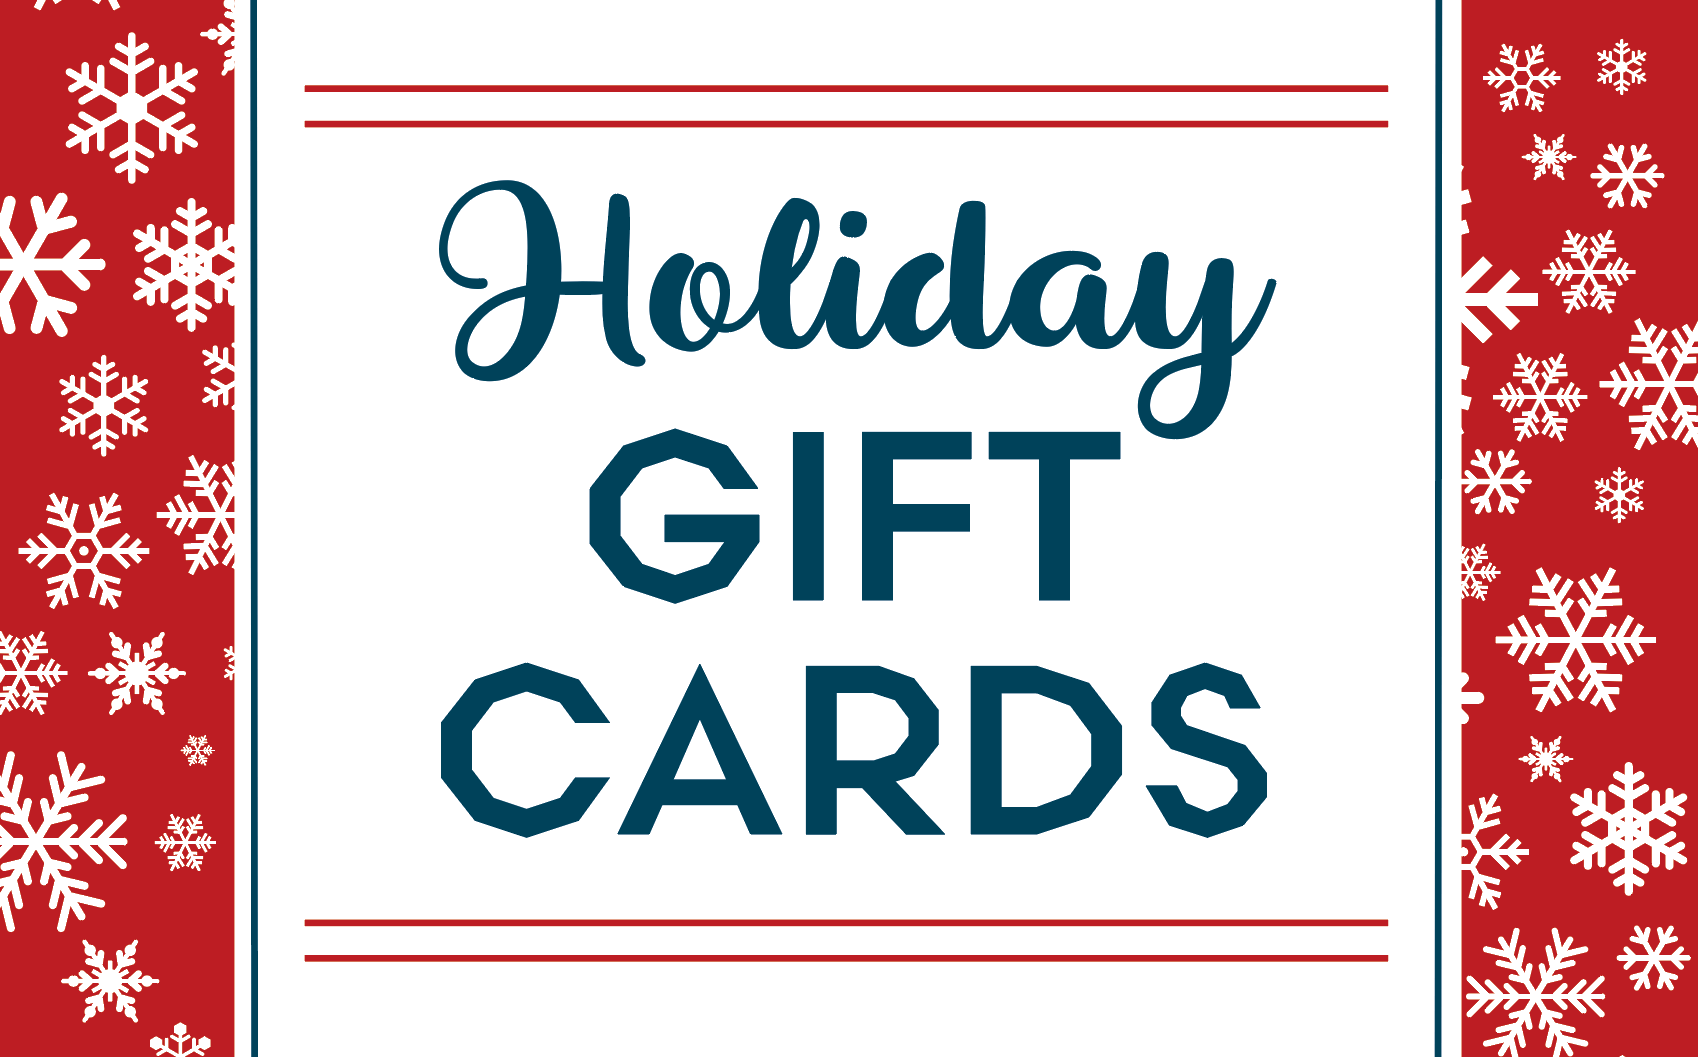 Holiday Castle Hill Fitness Gift Cards 2018